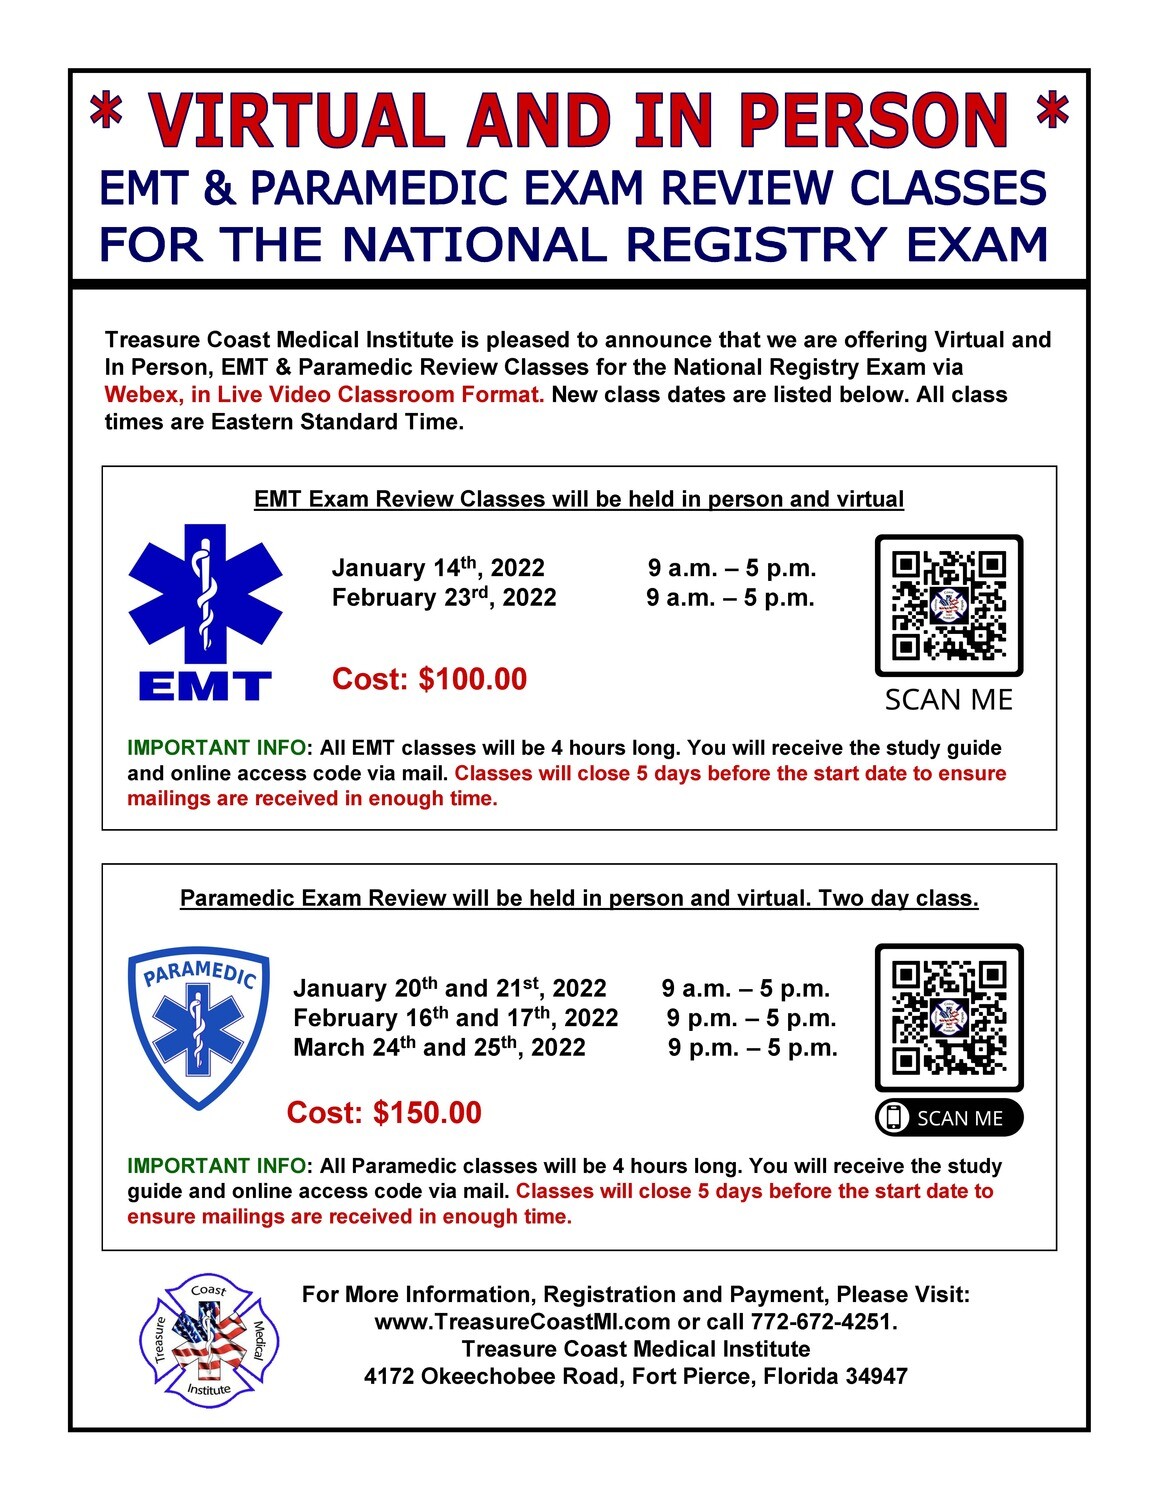 EMT Exam Review February 23rd Fort Pierce TCMI 
(IN PERSON)